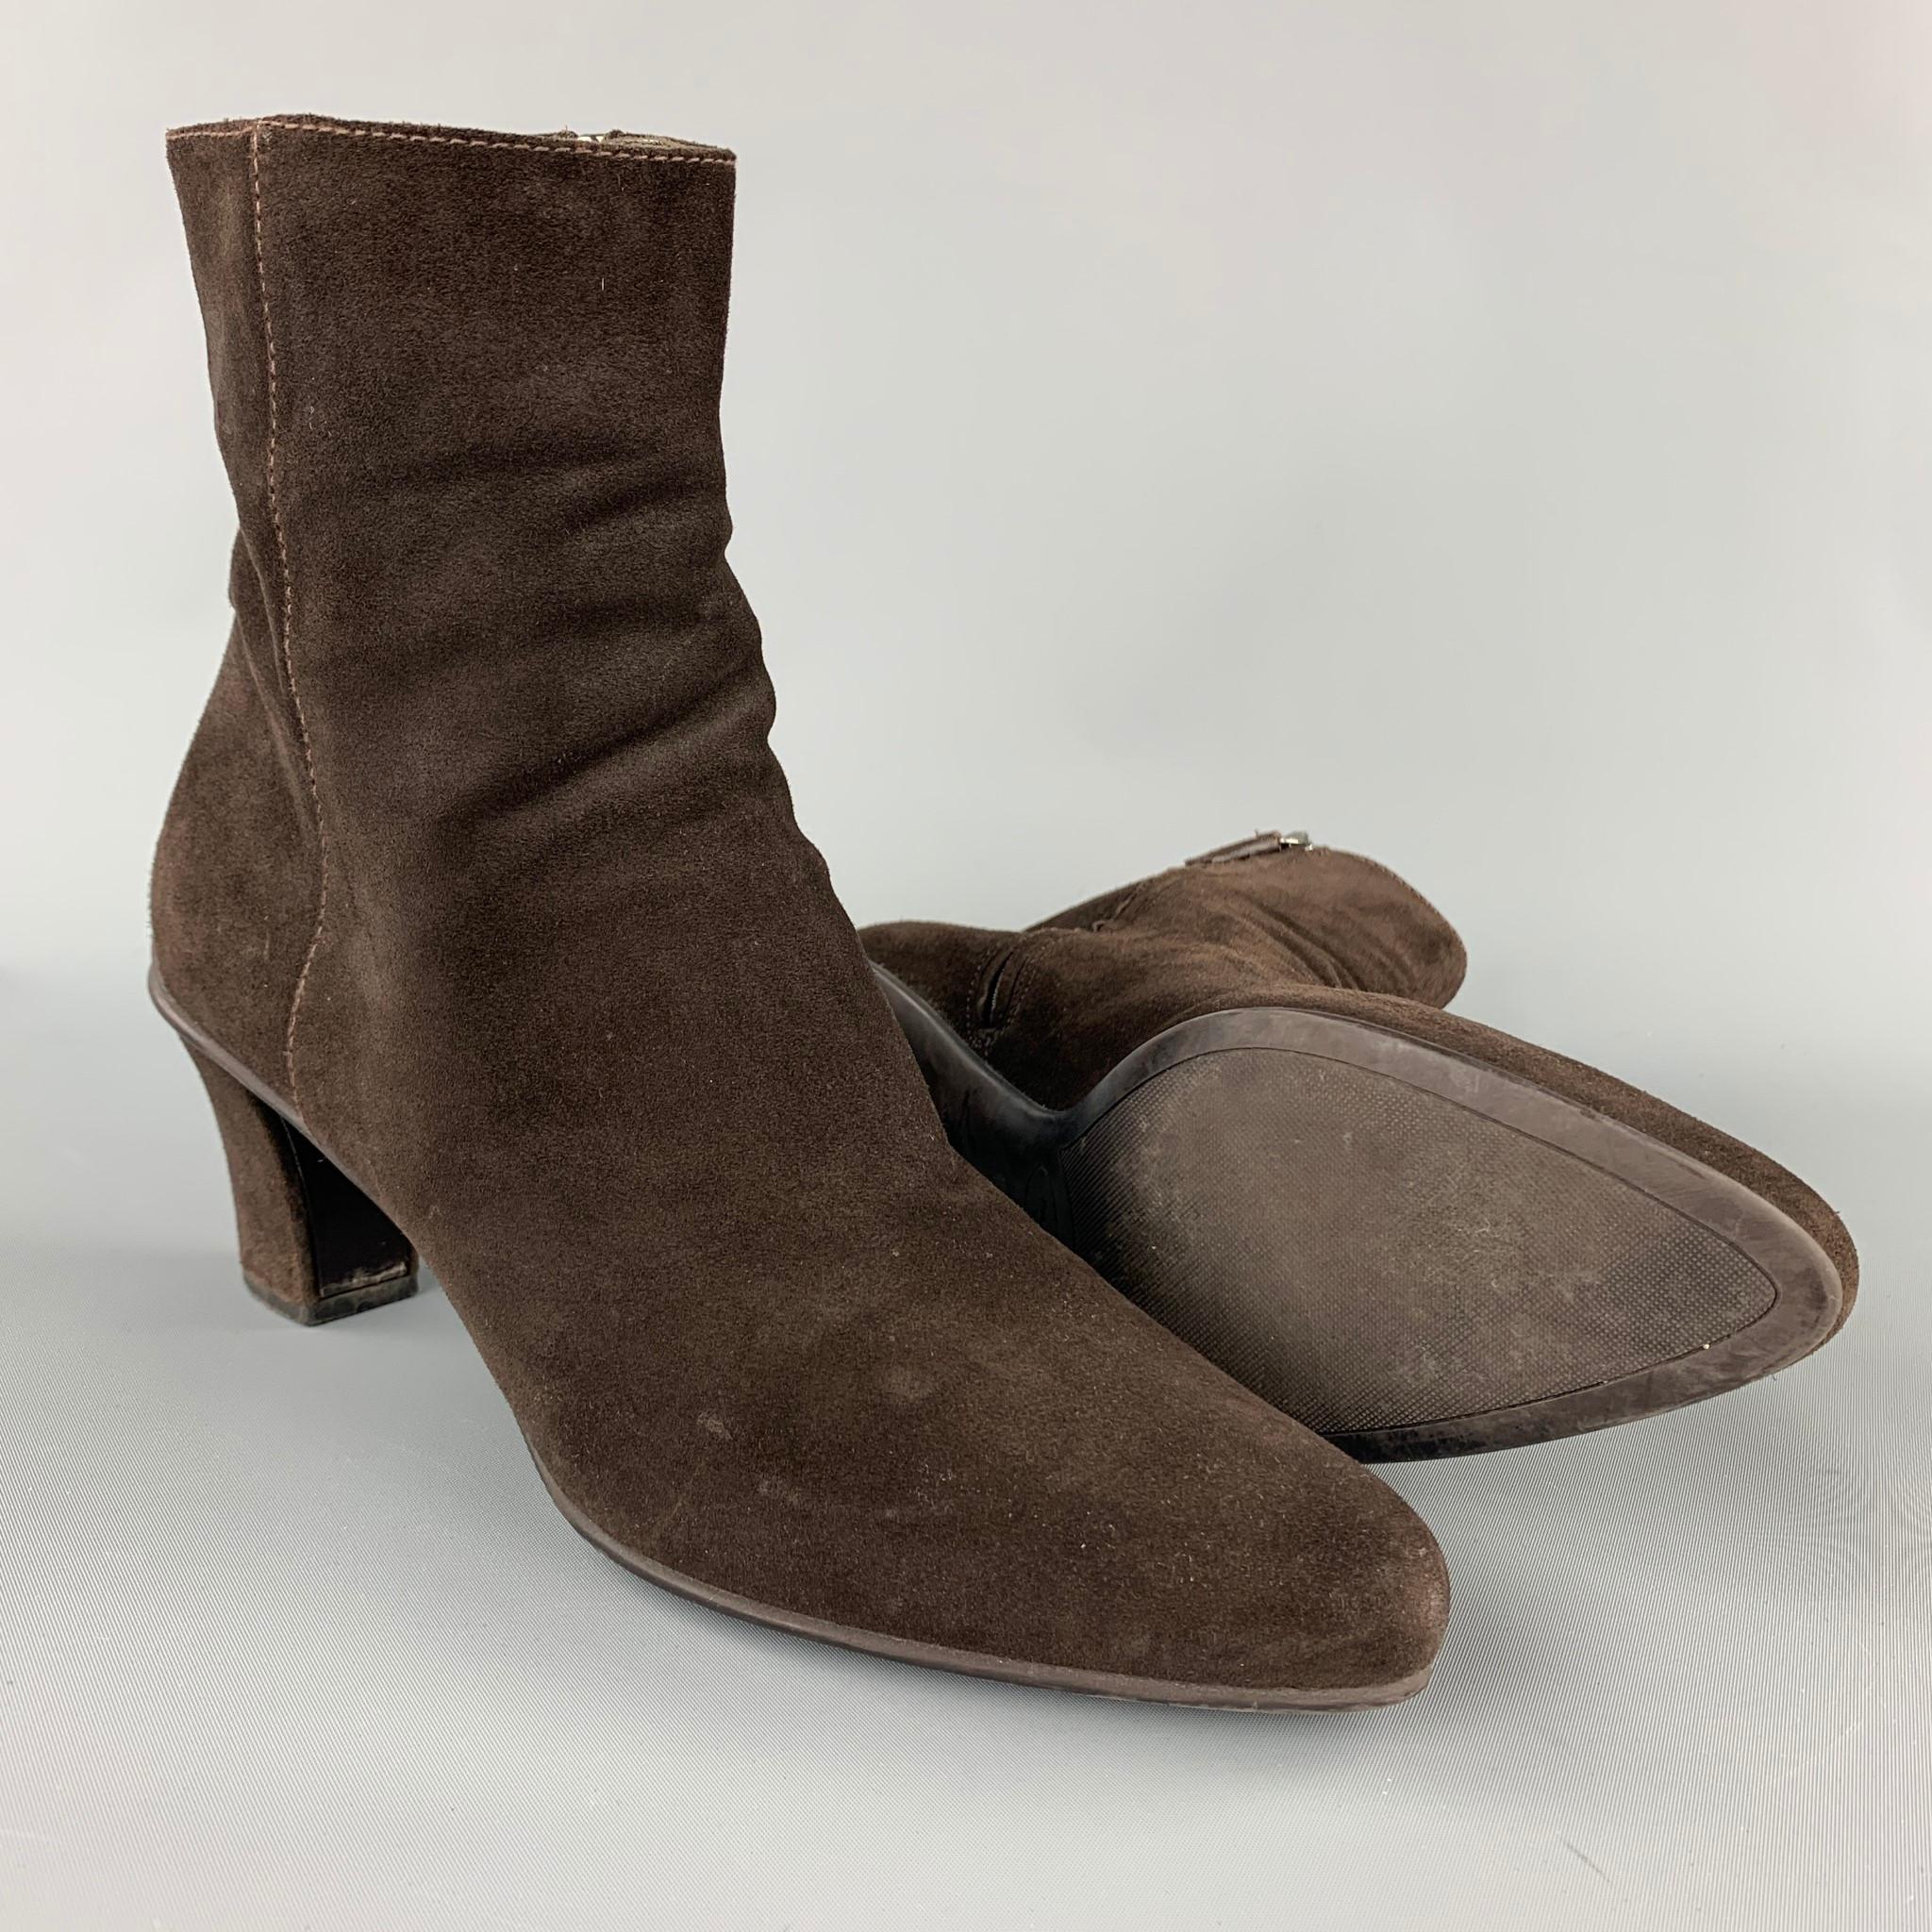 Black PRADA Size 9.5 Brown Suede Ankle Boots